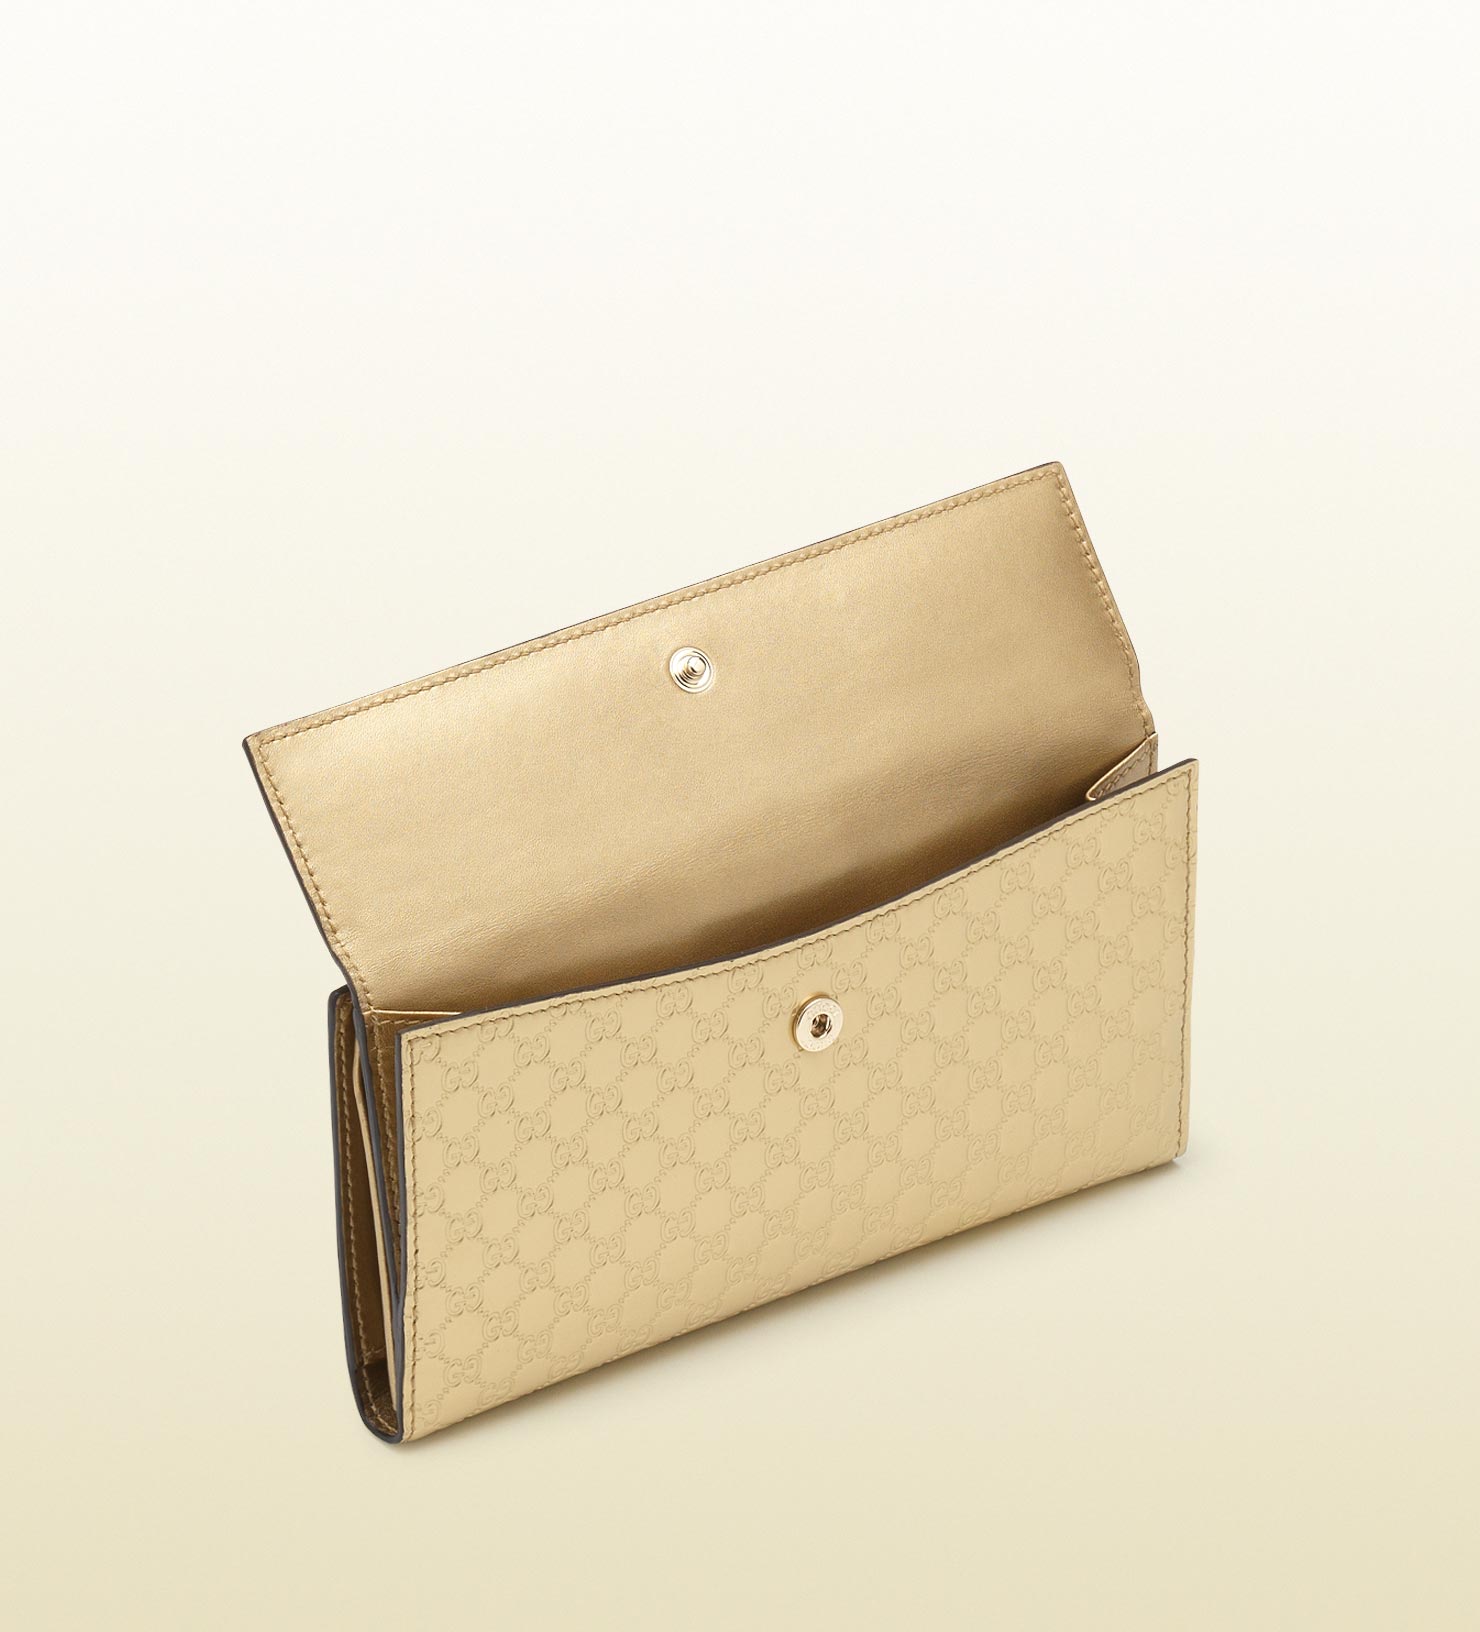 gucci gold wallet, OFF 79%,www 